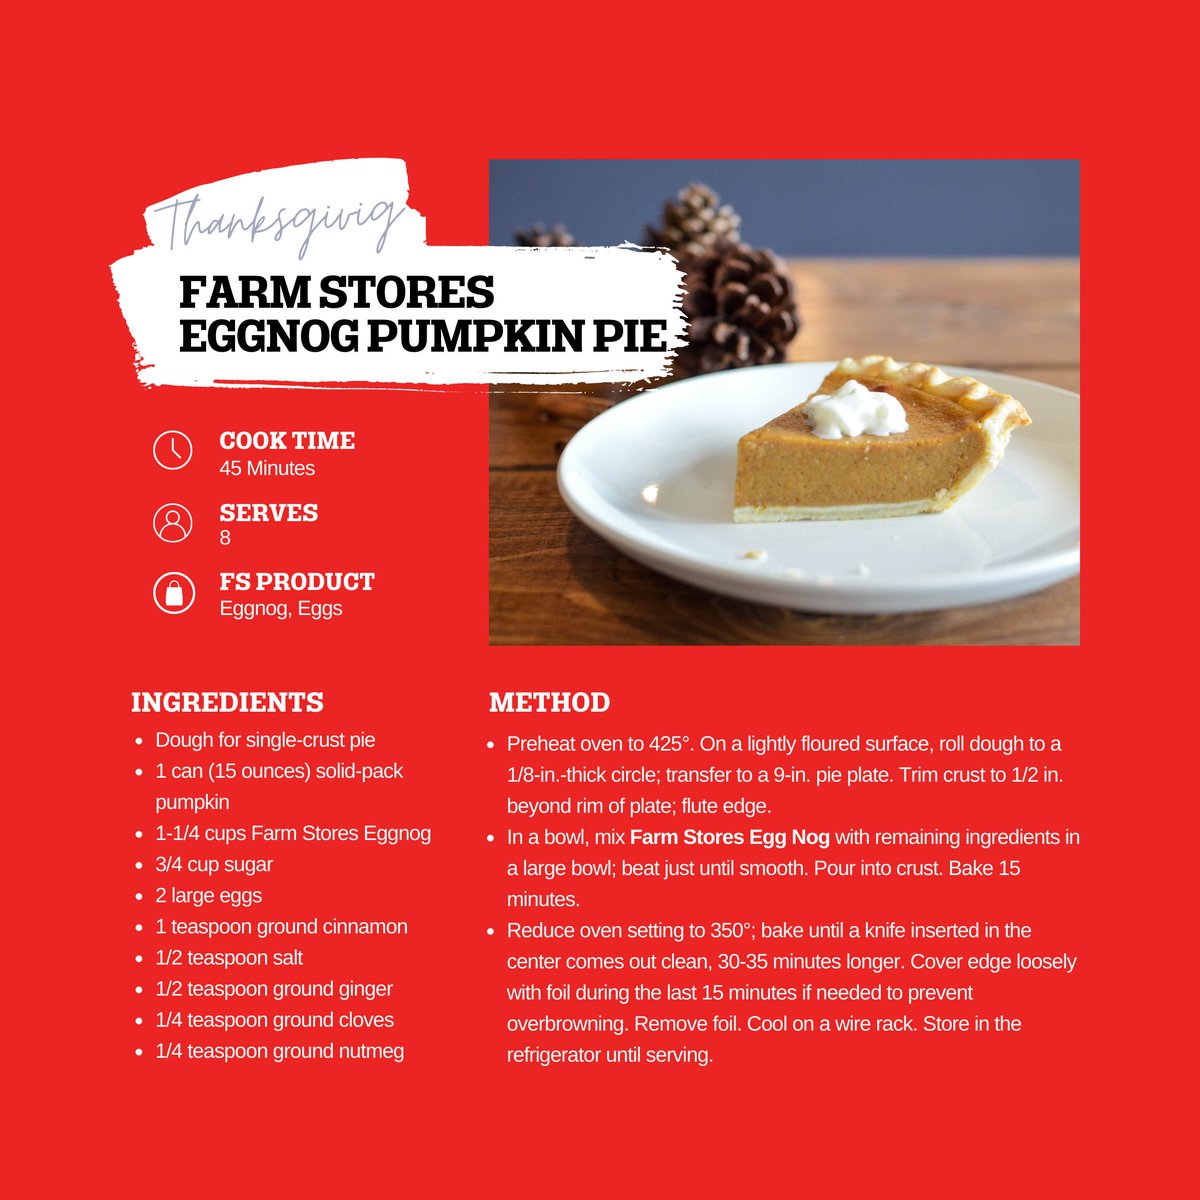 Taste the Holidays with our special Farm Stores Thanksgiving Recipes 🦃 🍁 Be the talk of the table with these unique Farm Stores twists on classic Thanksgiving recipes. Tag @farmstores and show us your tasty creations! #recipes #holidayrecipes #eggnog #recipeideas